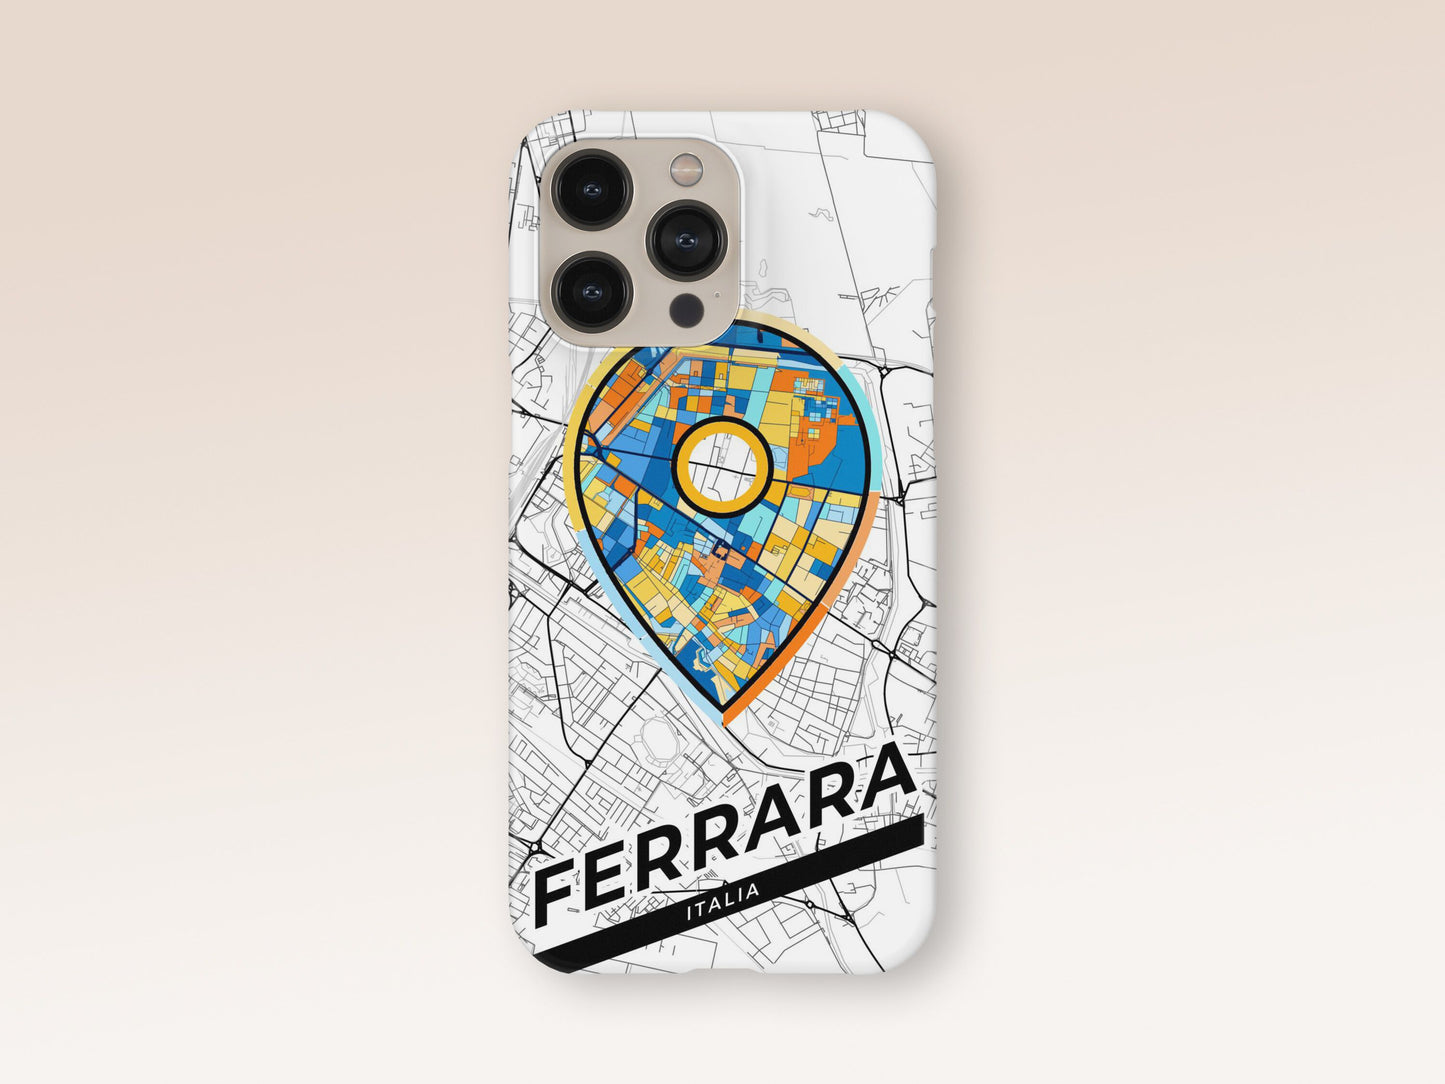 Ferrara Italy slim phone case with colorful icon. Birthday, wedding or housewarming gift. Couple match cases. 1